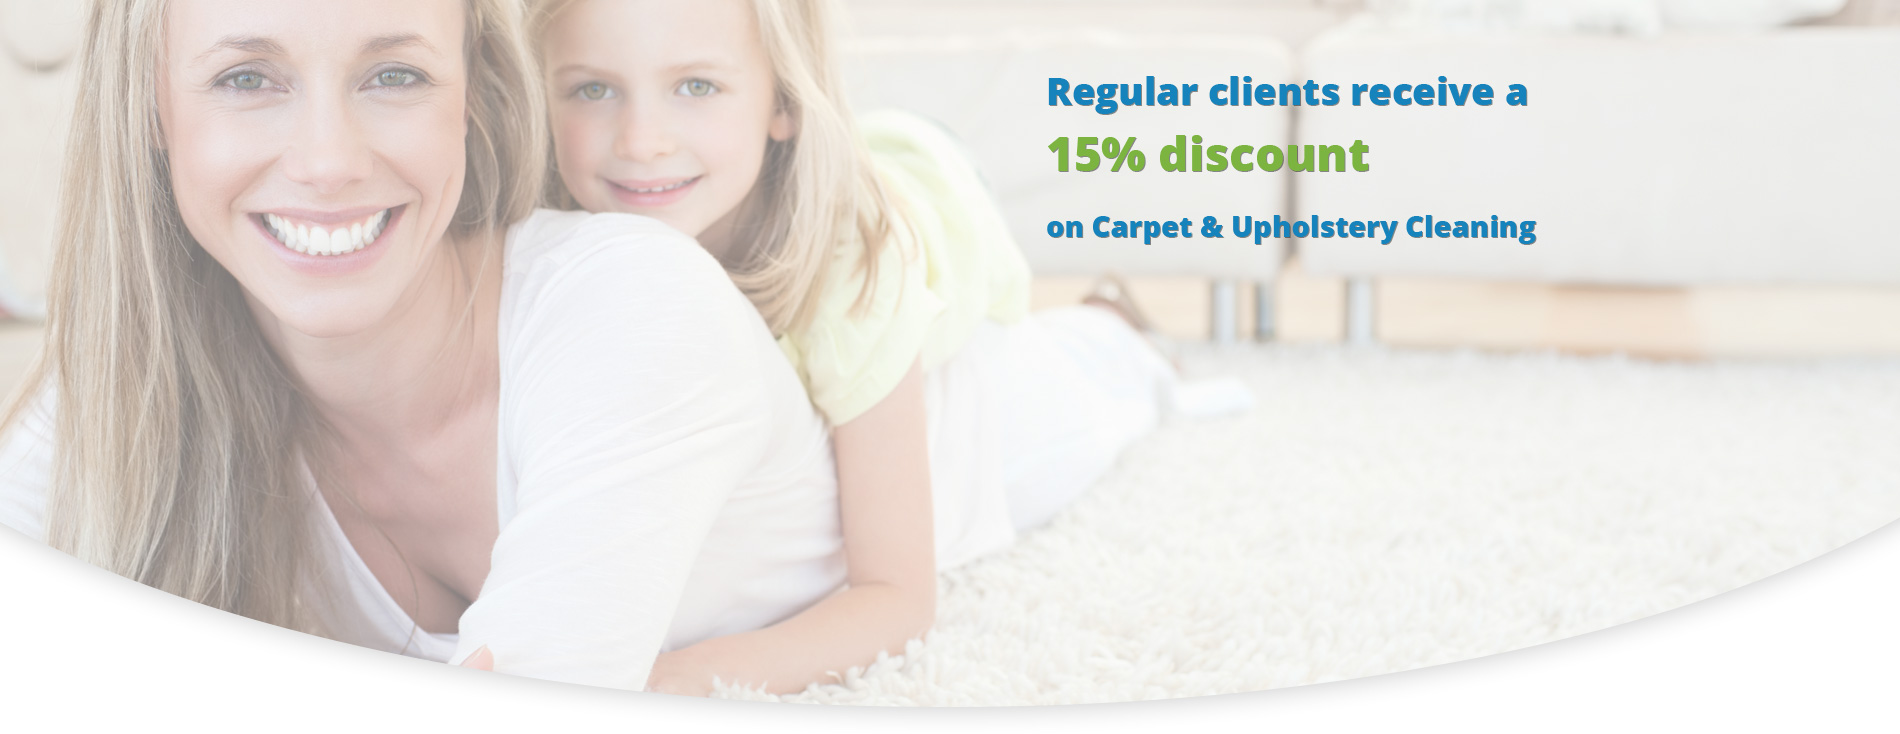 Regular clients receive a 15% discount on Carpet & Upholstery Cleaning